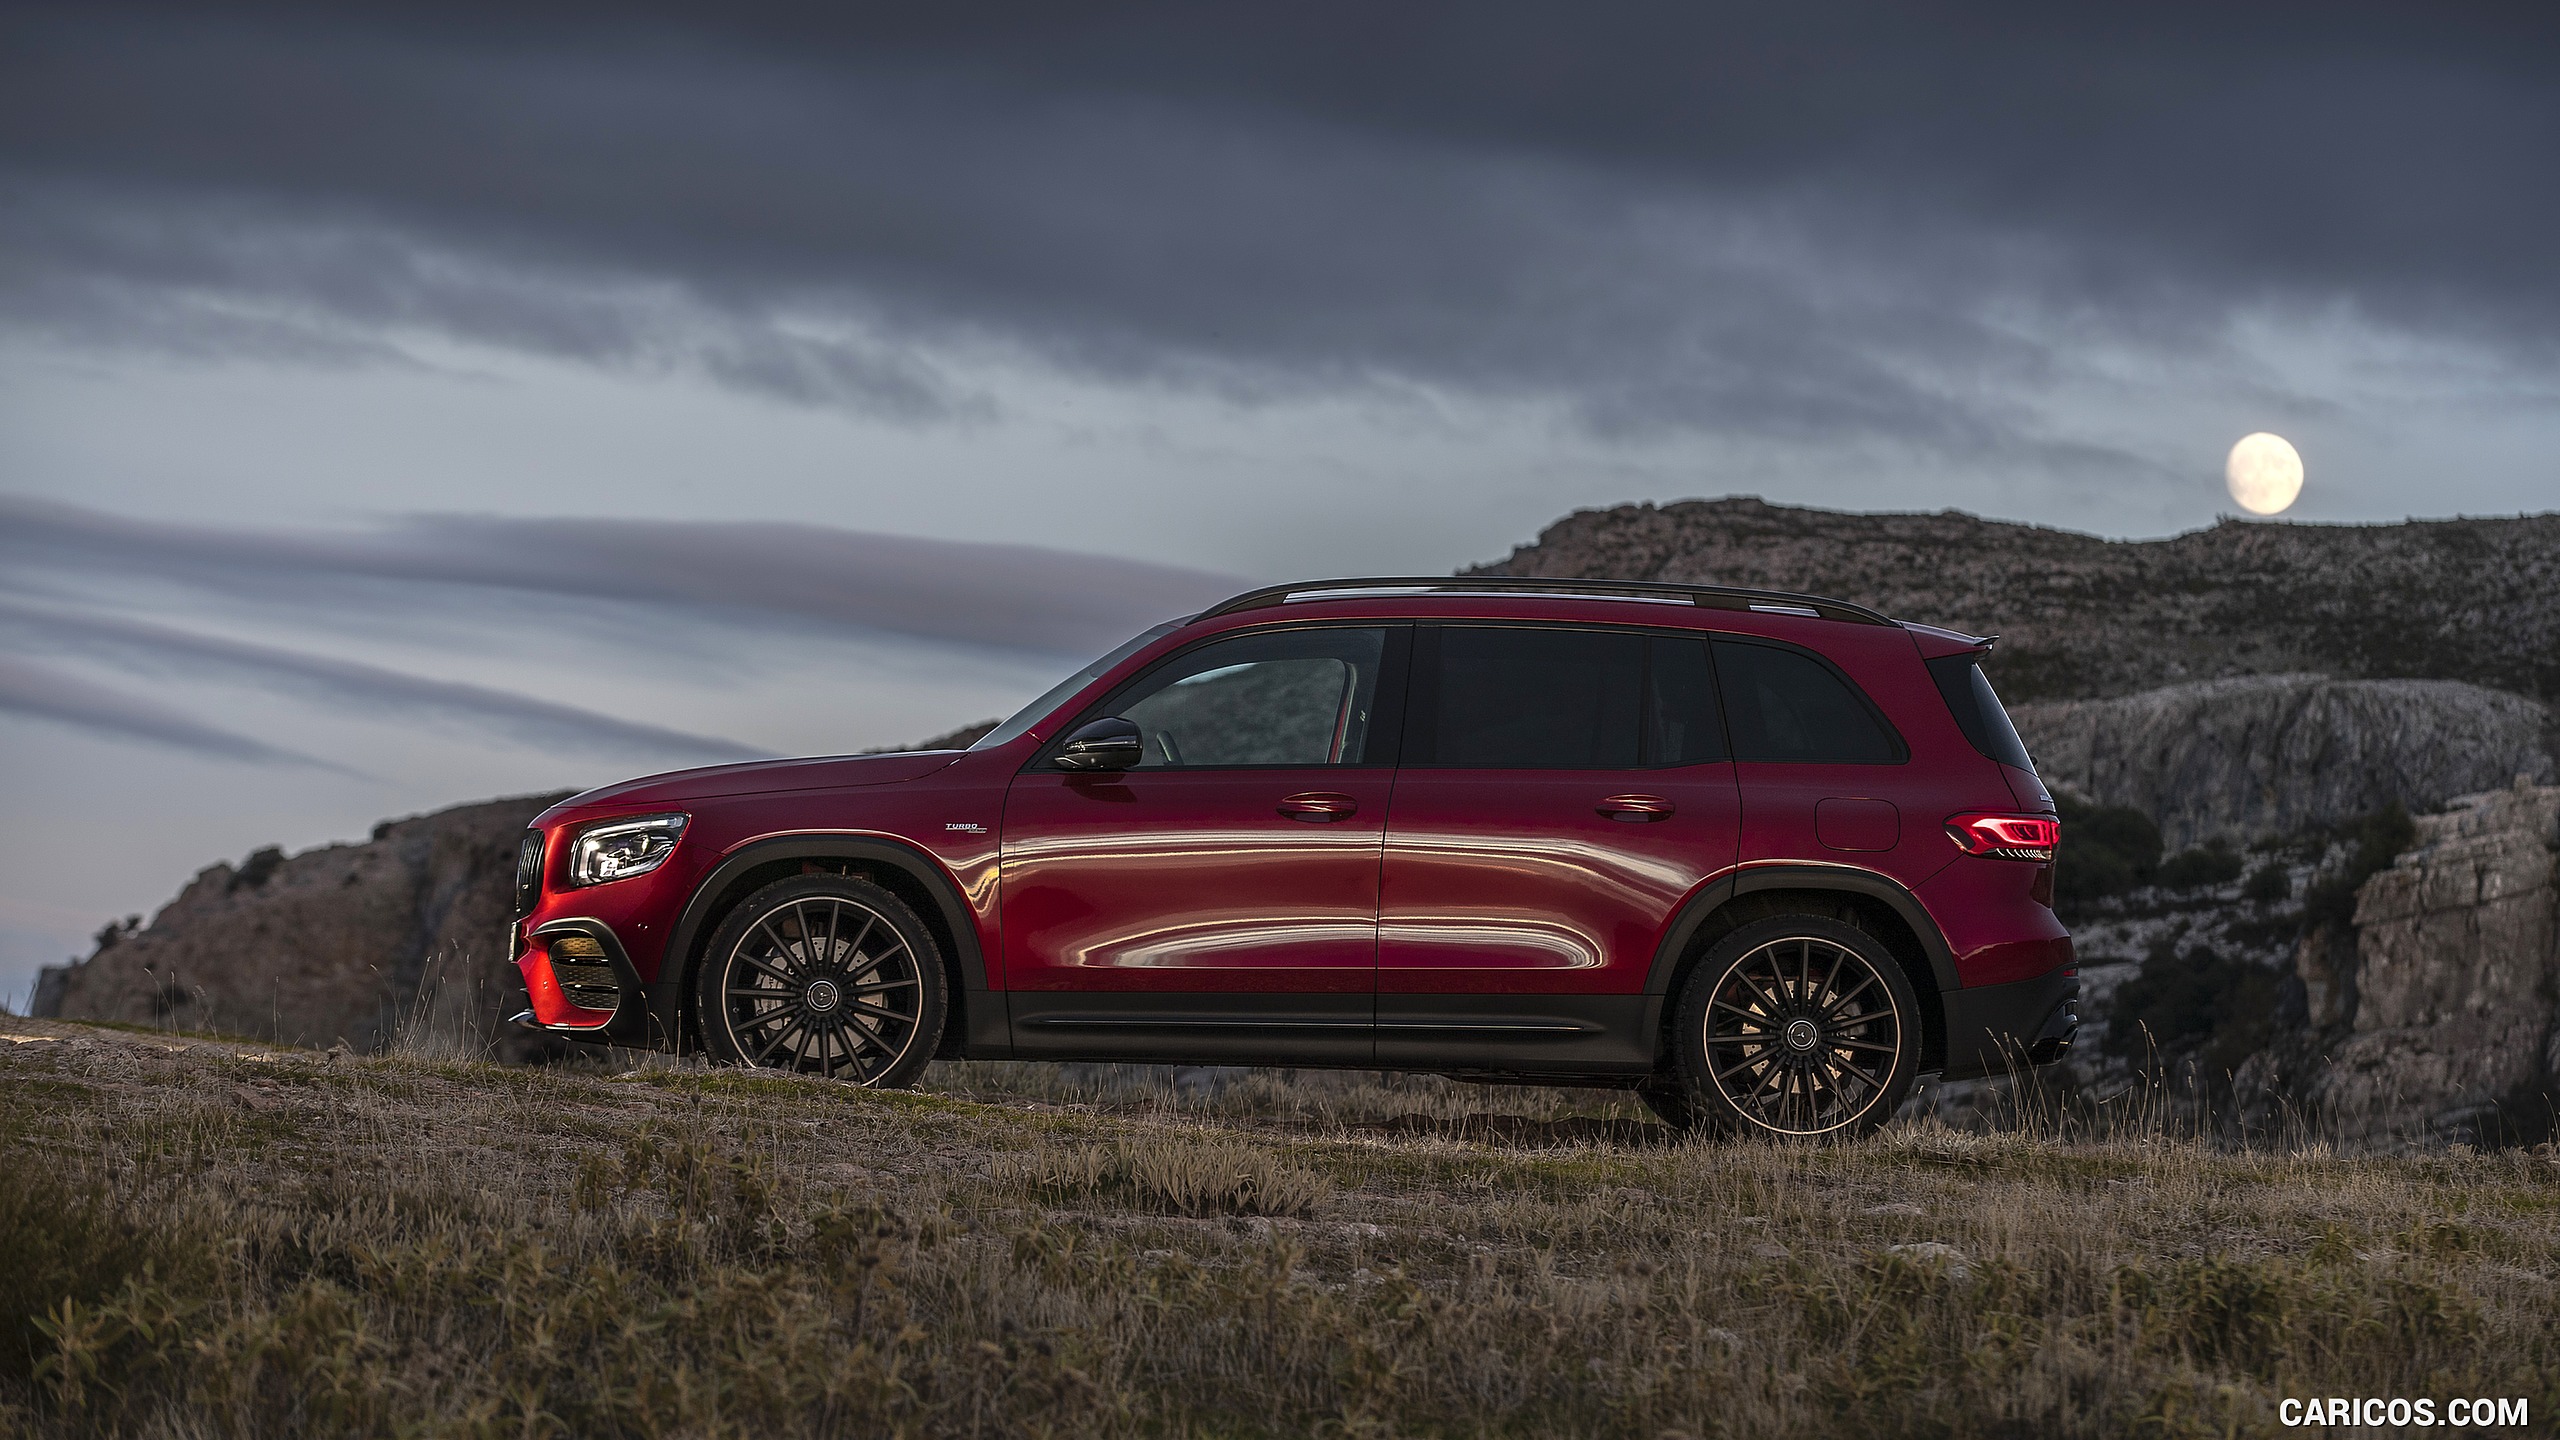 2021 Mercedes-AMG GLB 35 4MATIC (Color: Designo Patagonia Red Metallic) - Side, #38 of 95